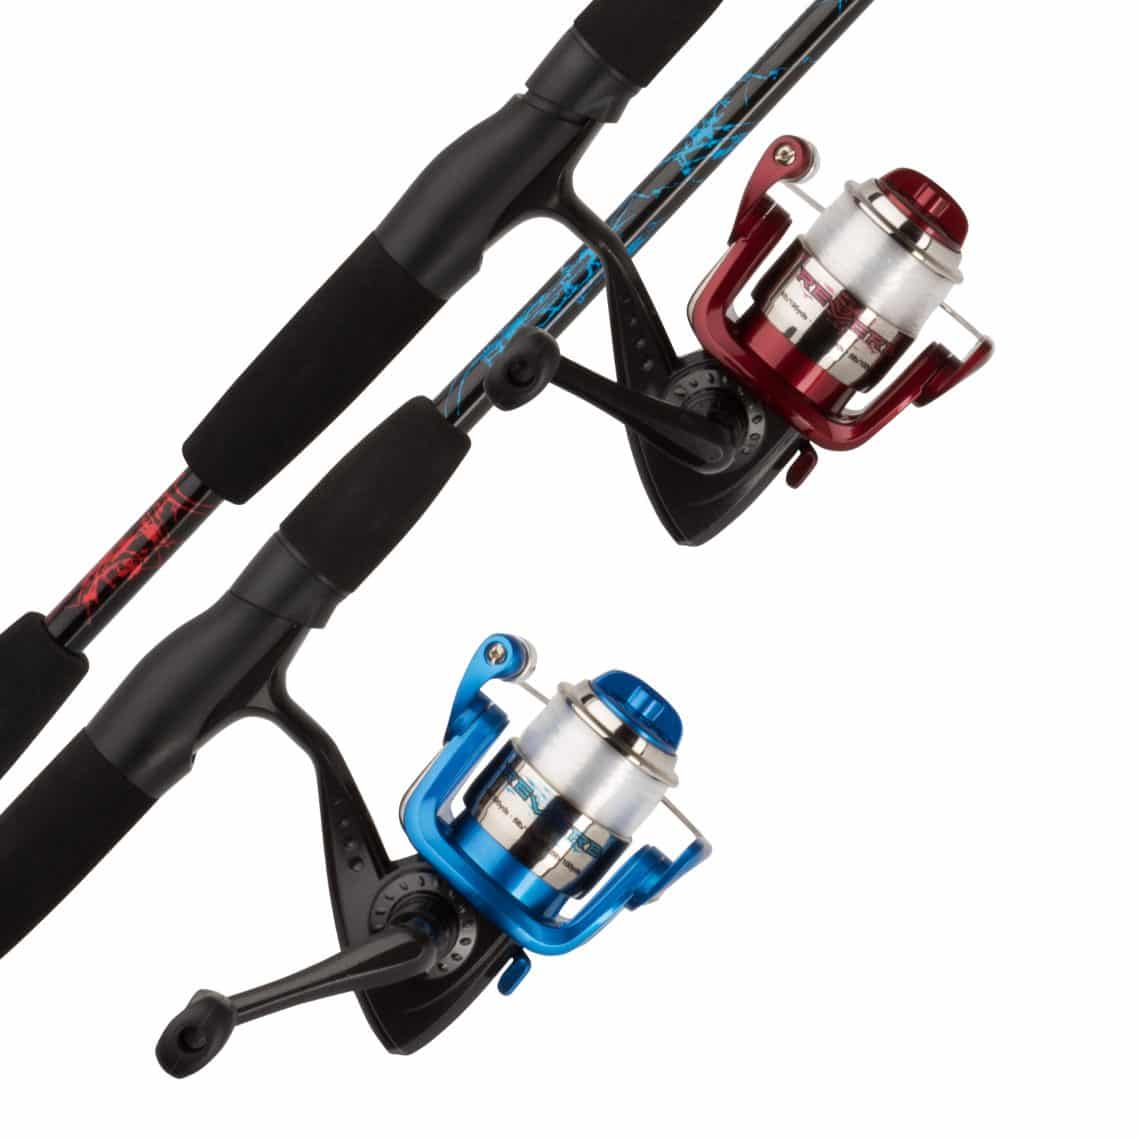 Unbranded Fishing Rod & Reel Combos